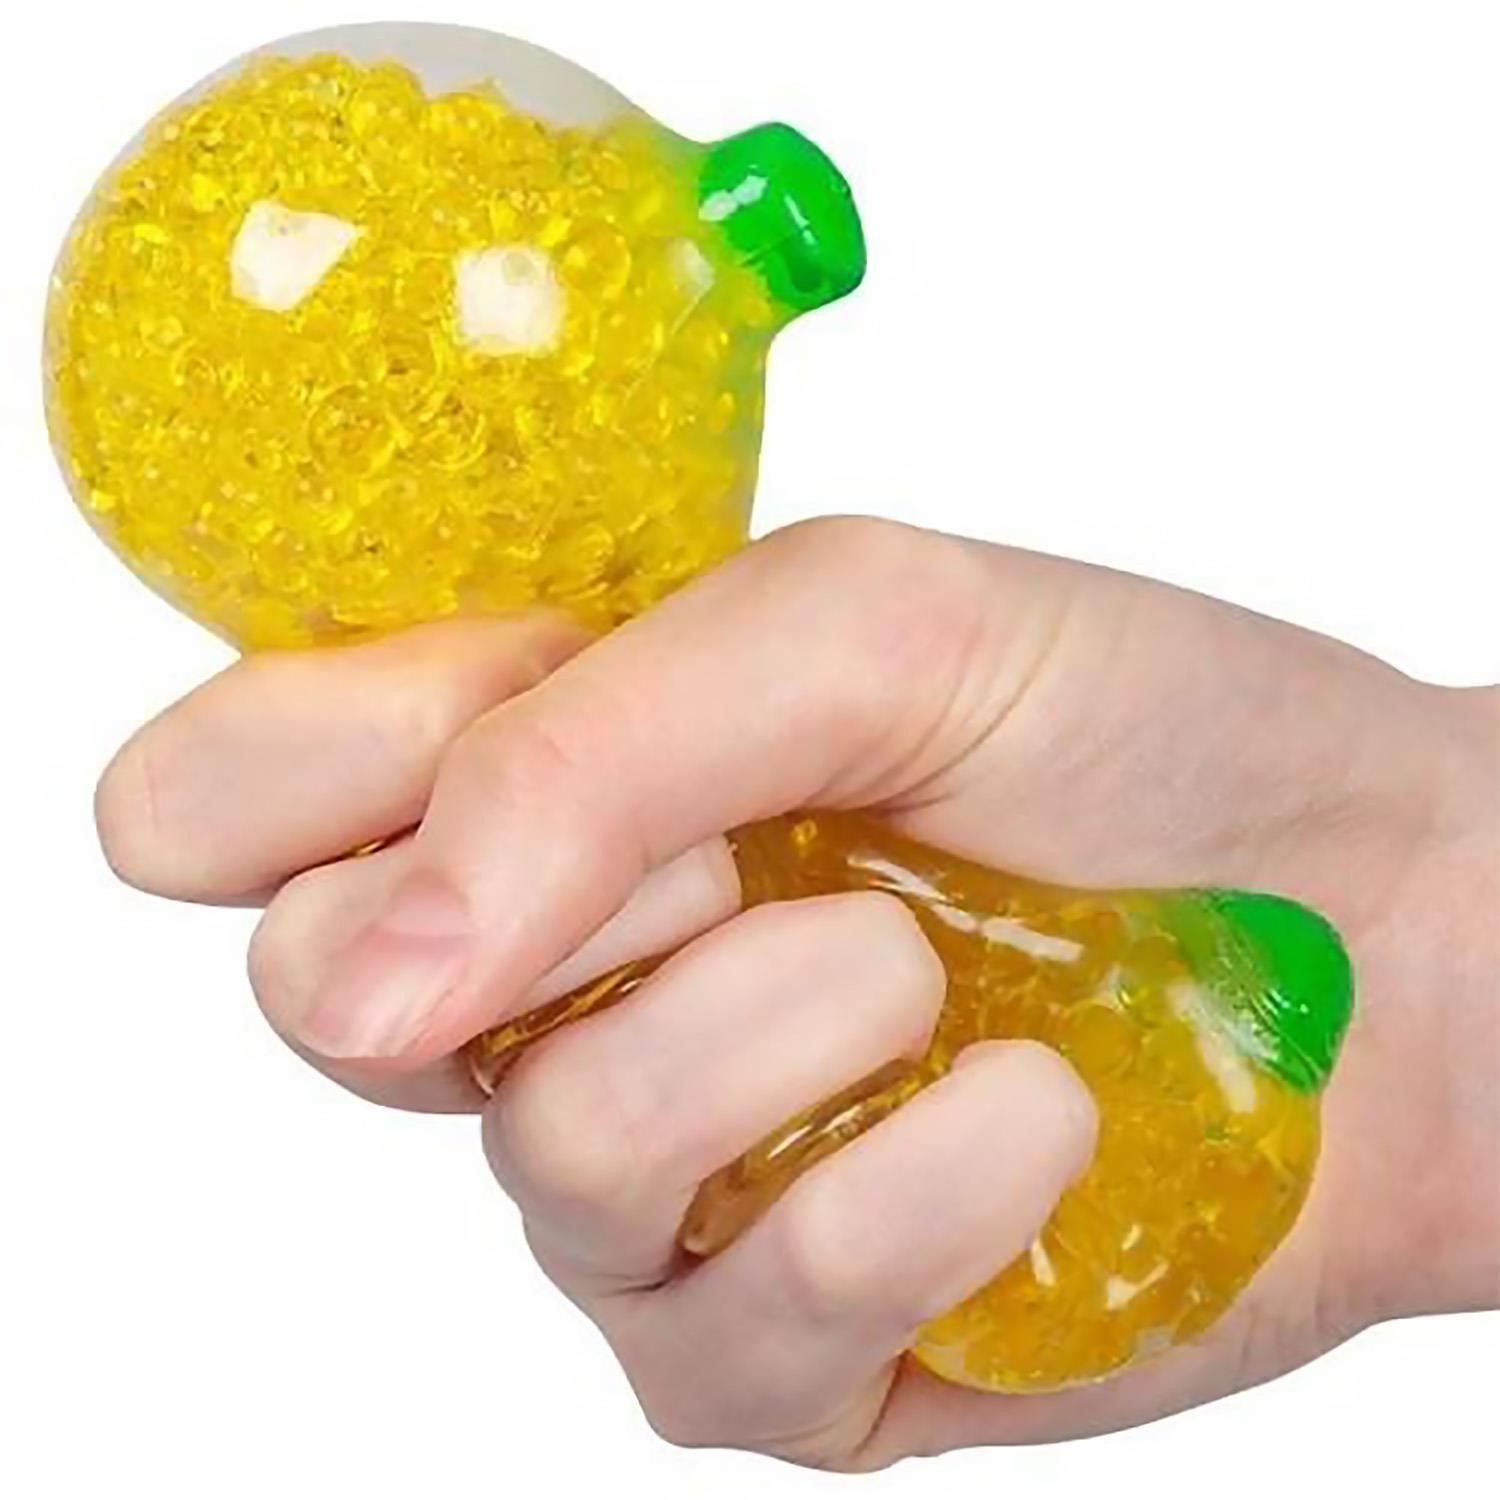 Bead Banana Pressure Release Sensory Toy by The Magic Toy Shop - The Magic Toy Shop